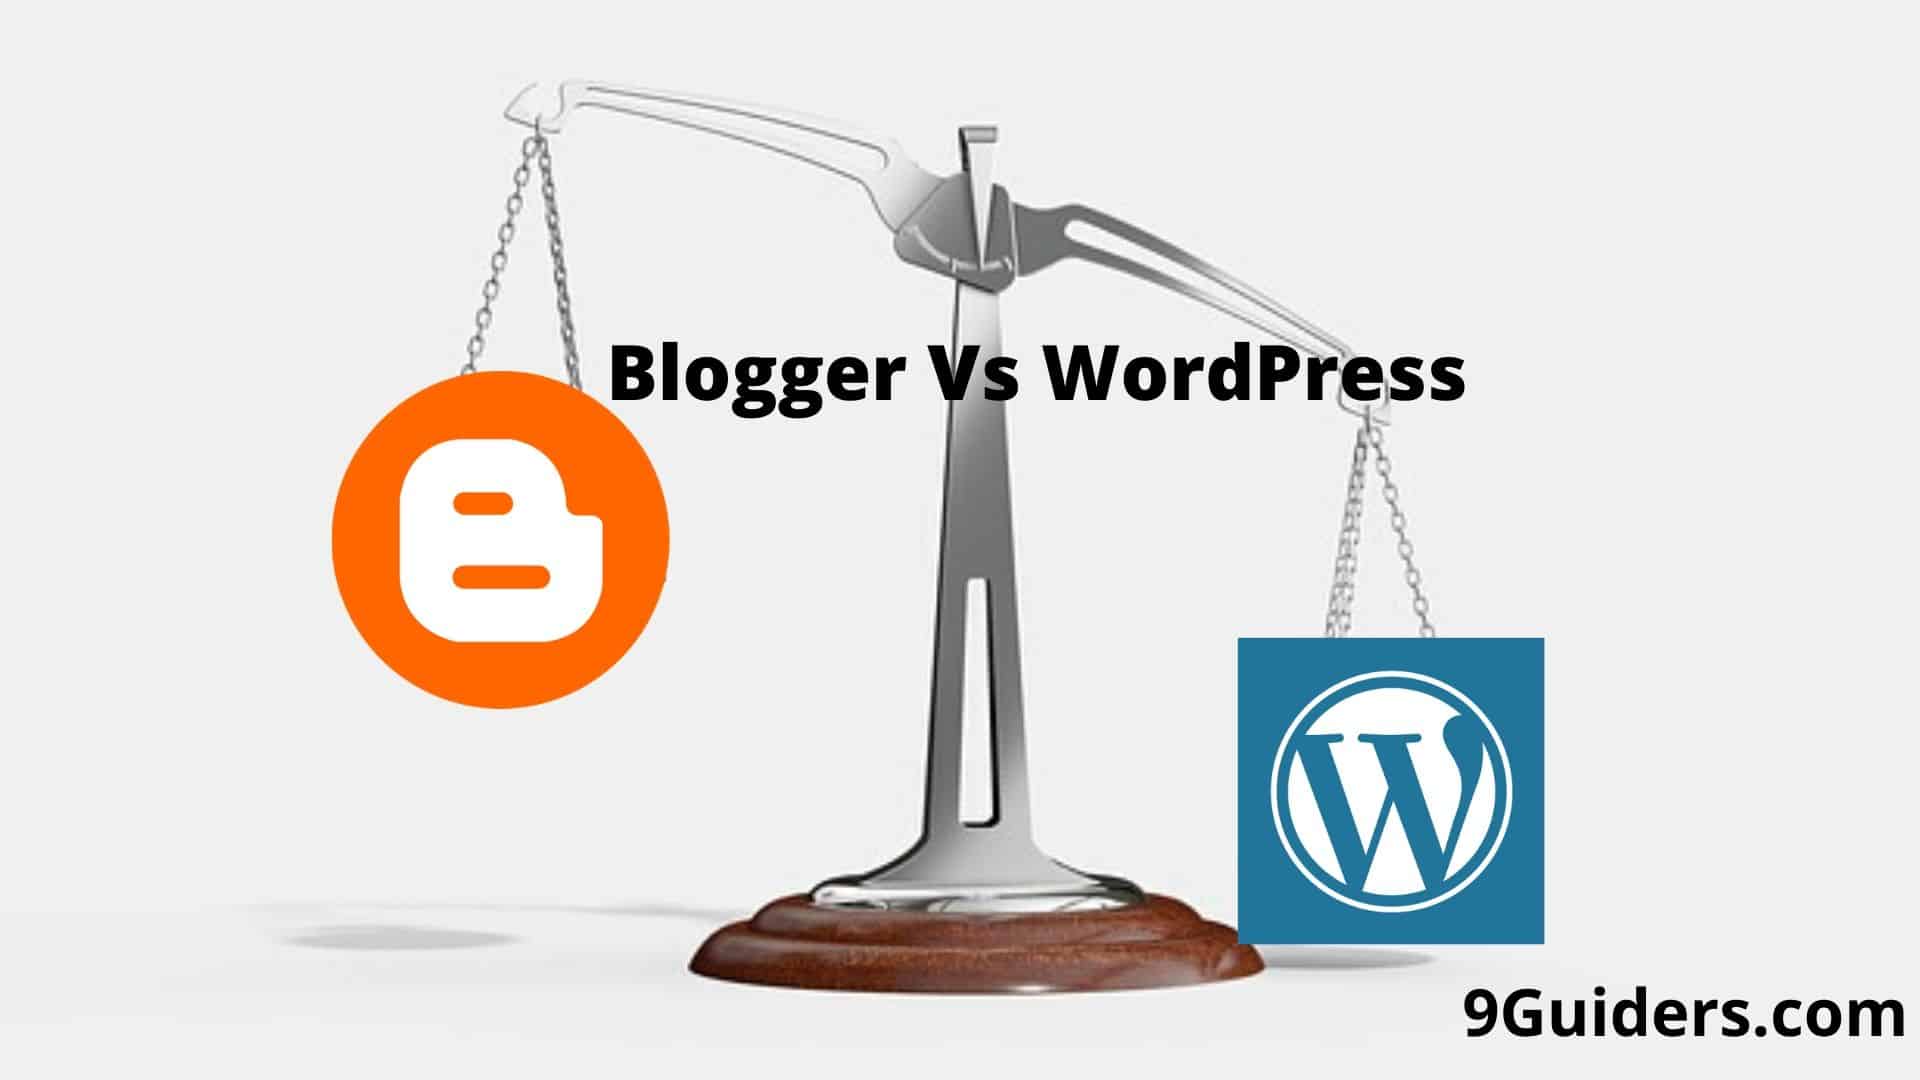 Blogger Vs WordPress: Which is the Best?